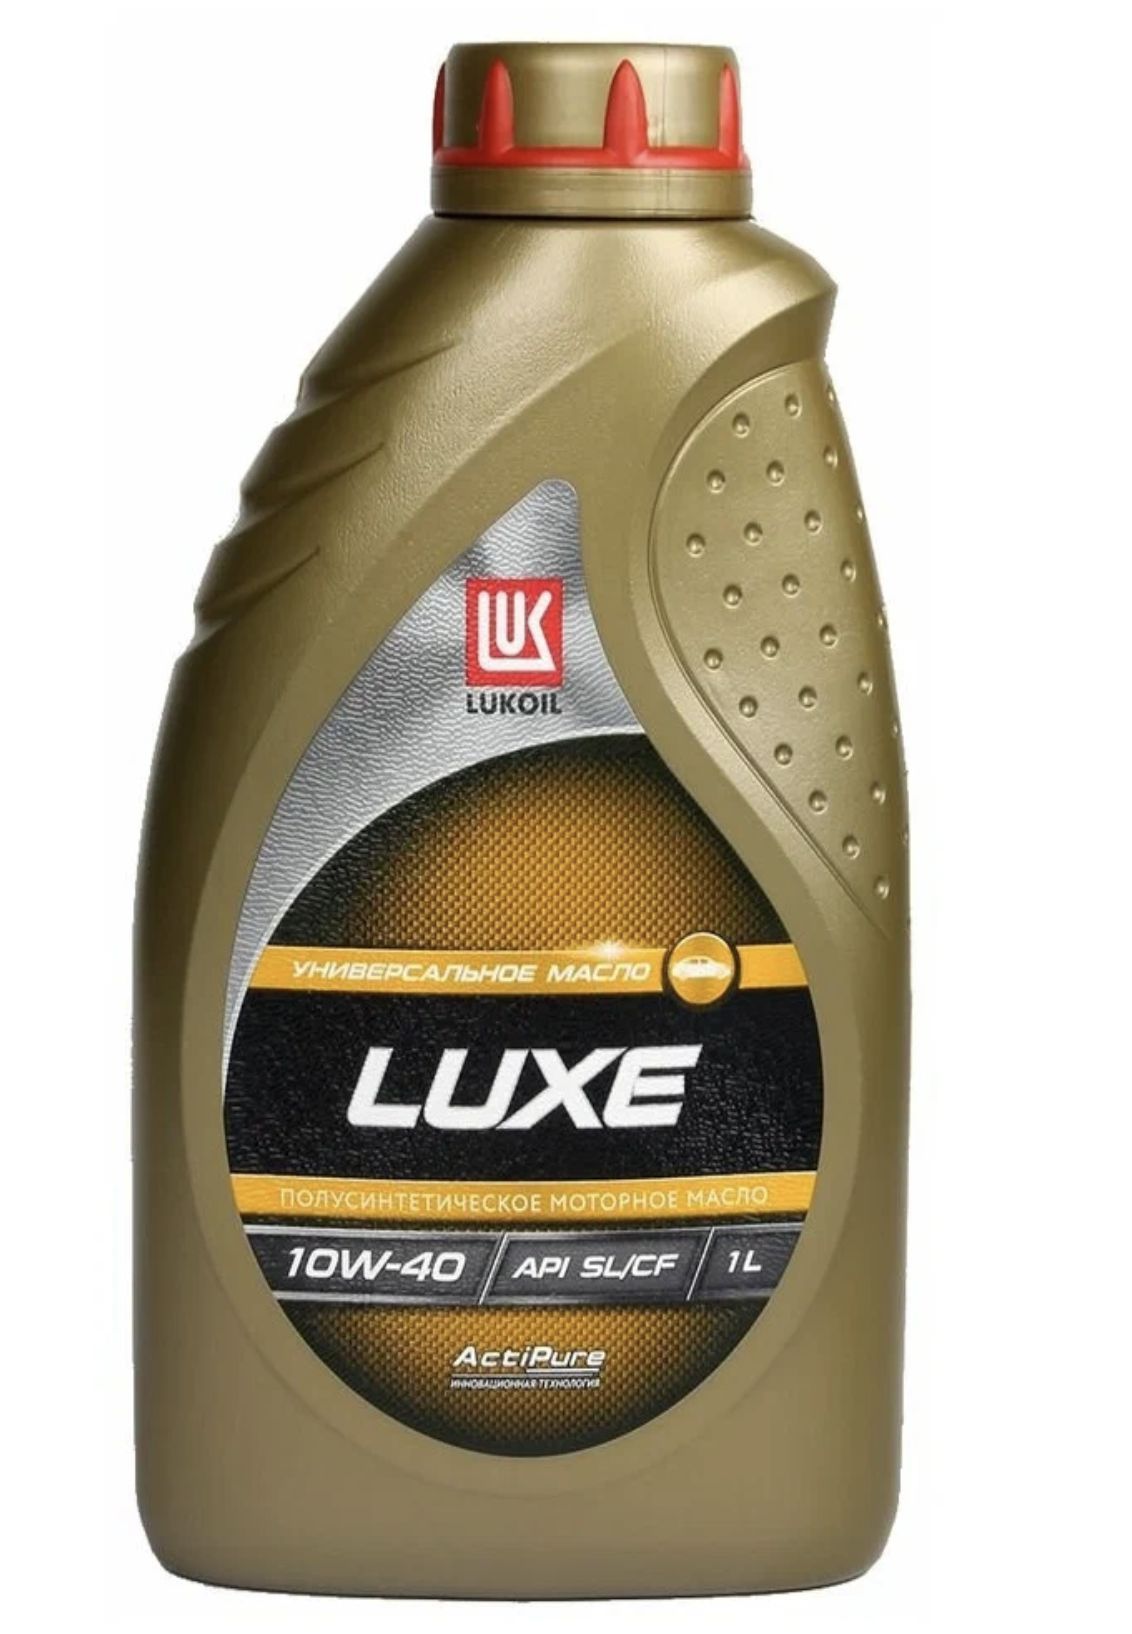 Лукойл 5 40 купить. Lukoil Luxe 5w-40. Масло Лукойл 10w 40 полусинтетика. Масло Лукойл Люкс 10w 40 полусинтетика. Масло моторное 5w40 Лукойл Люкс.